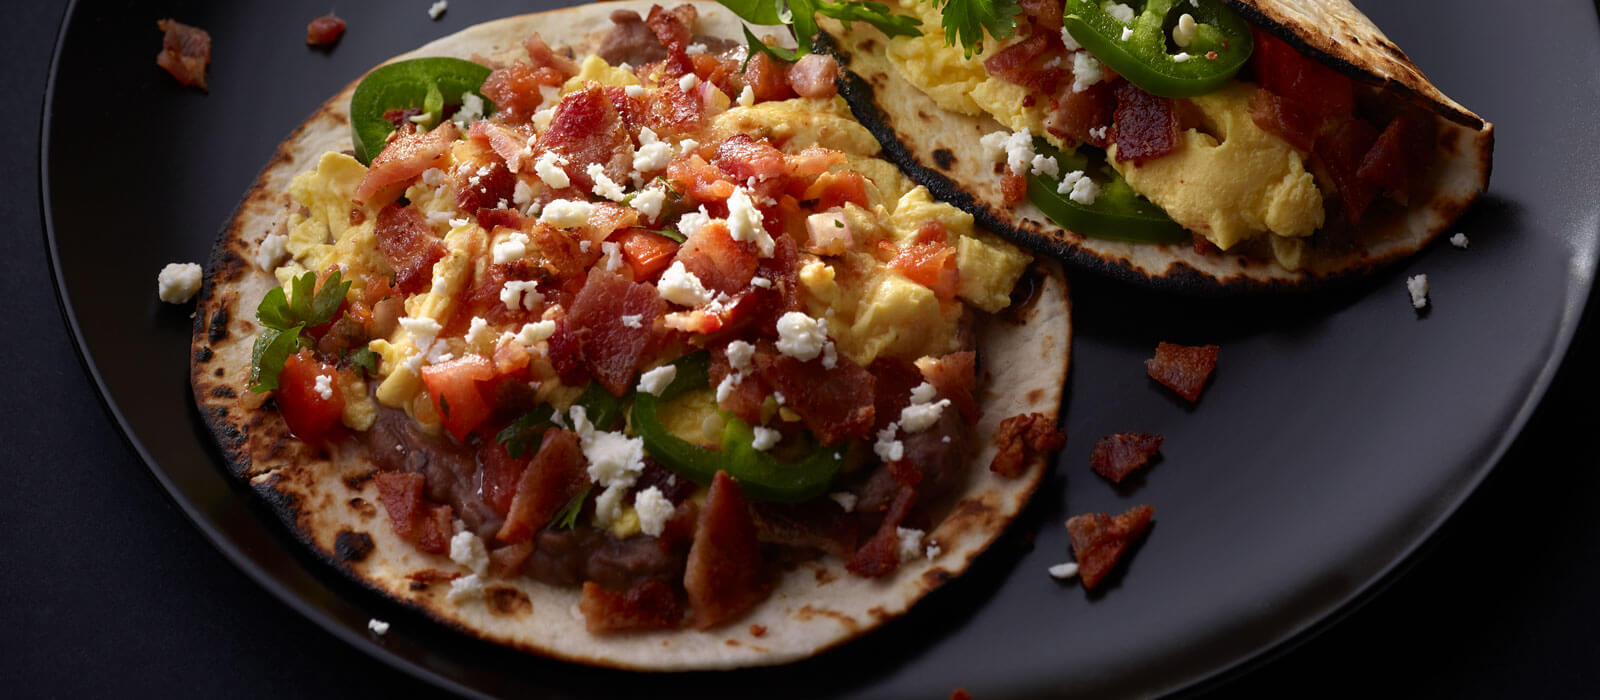 Tortilla tacos topped with eggs, bacon, cheese and jalapenos on black plate